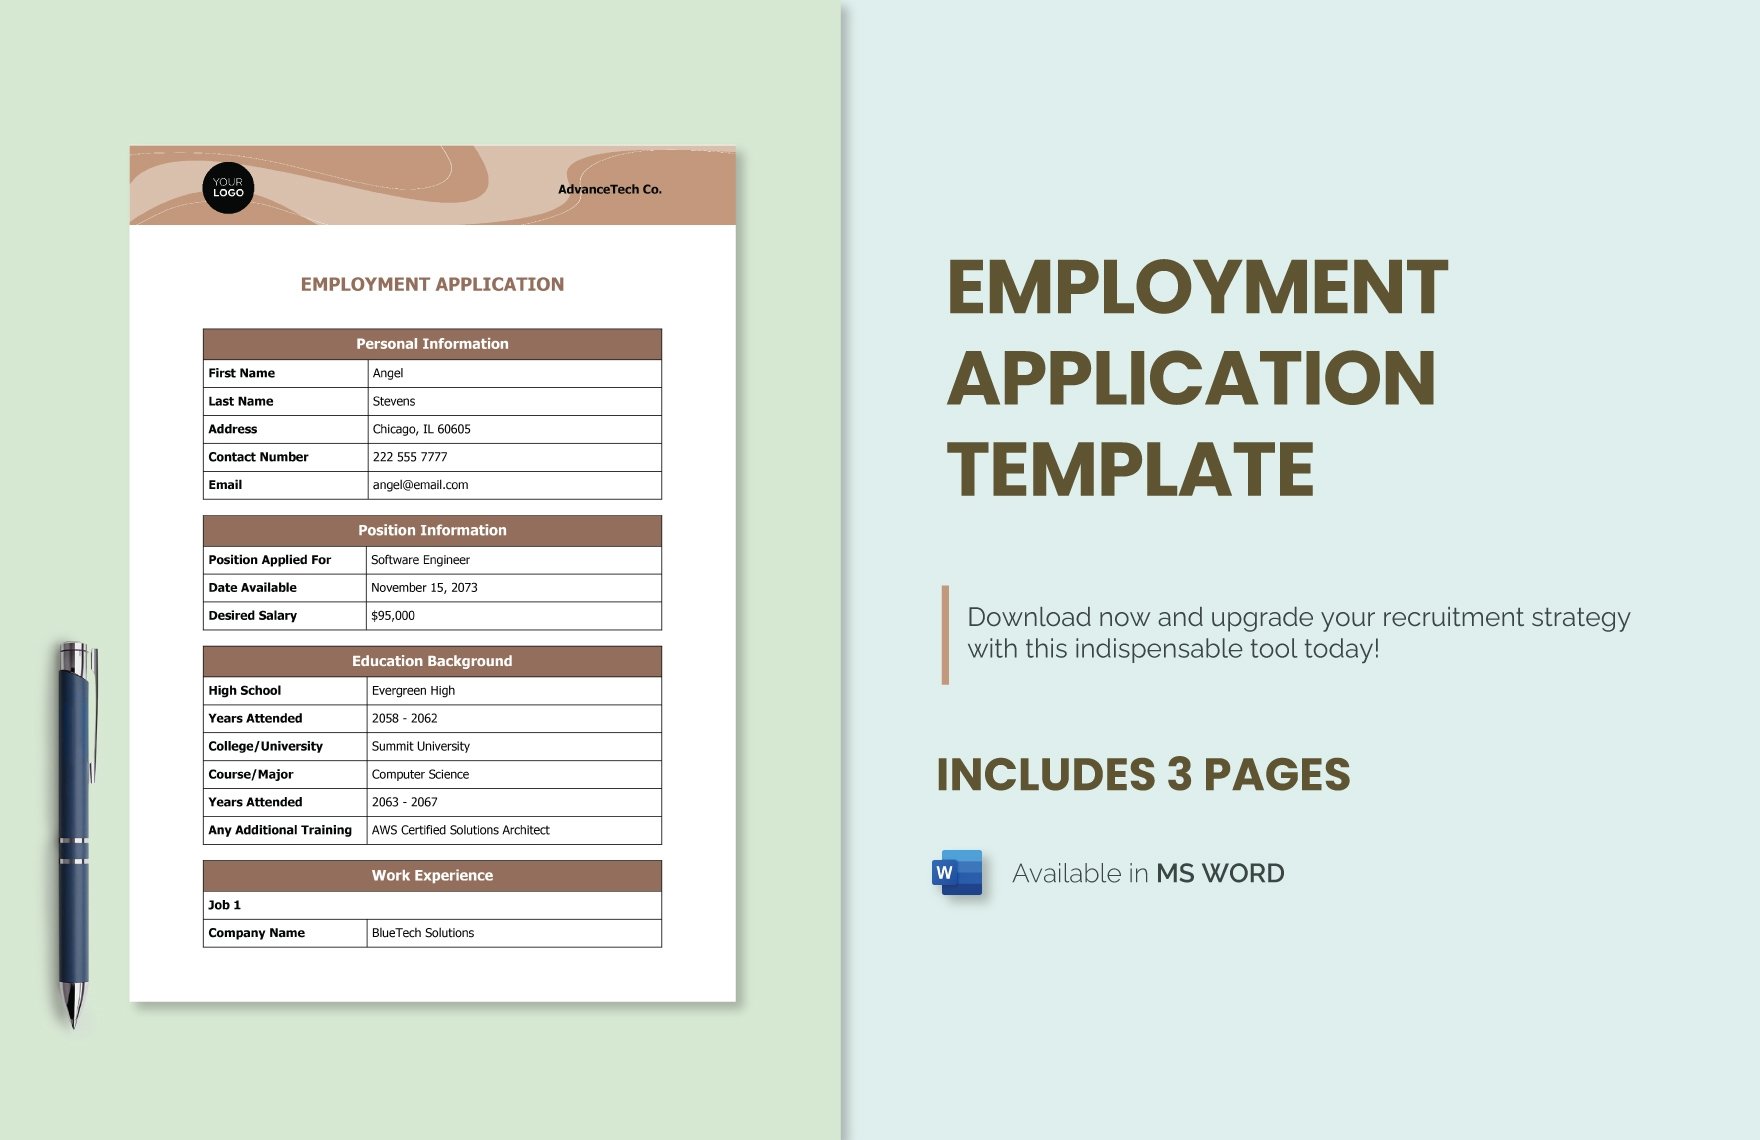 Employment Application Template in Word